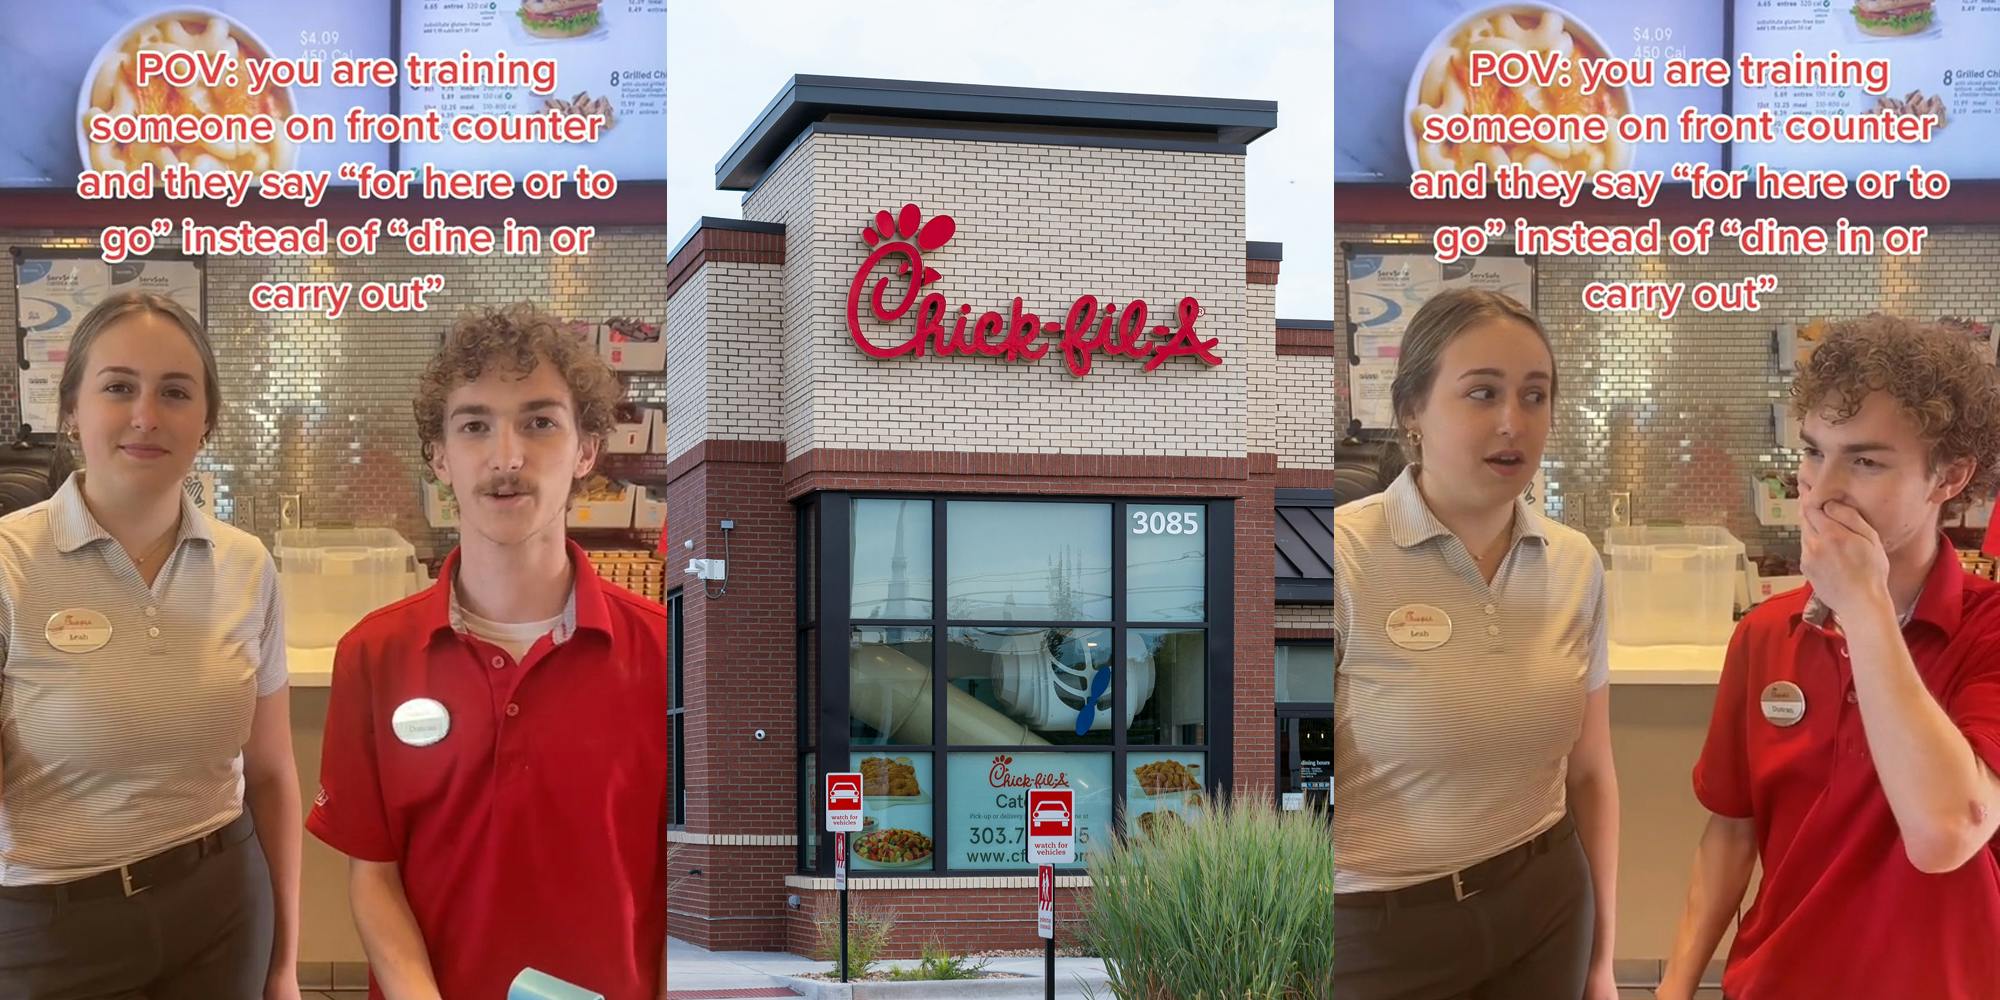 Chick-Fil-A employees with caption "POV: you are training someone on front counter and they say "for here or to go" instead of "dine in or carry out" (l) Chick-Fil-A building with sign (c) Chick-Fil-A employees with caption "POV: you are training someone on front counter and they say "for here or to go" instead of "dine in or carry out" (r)